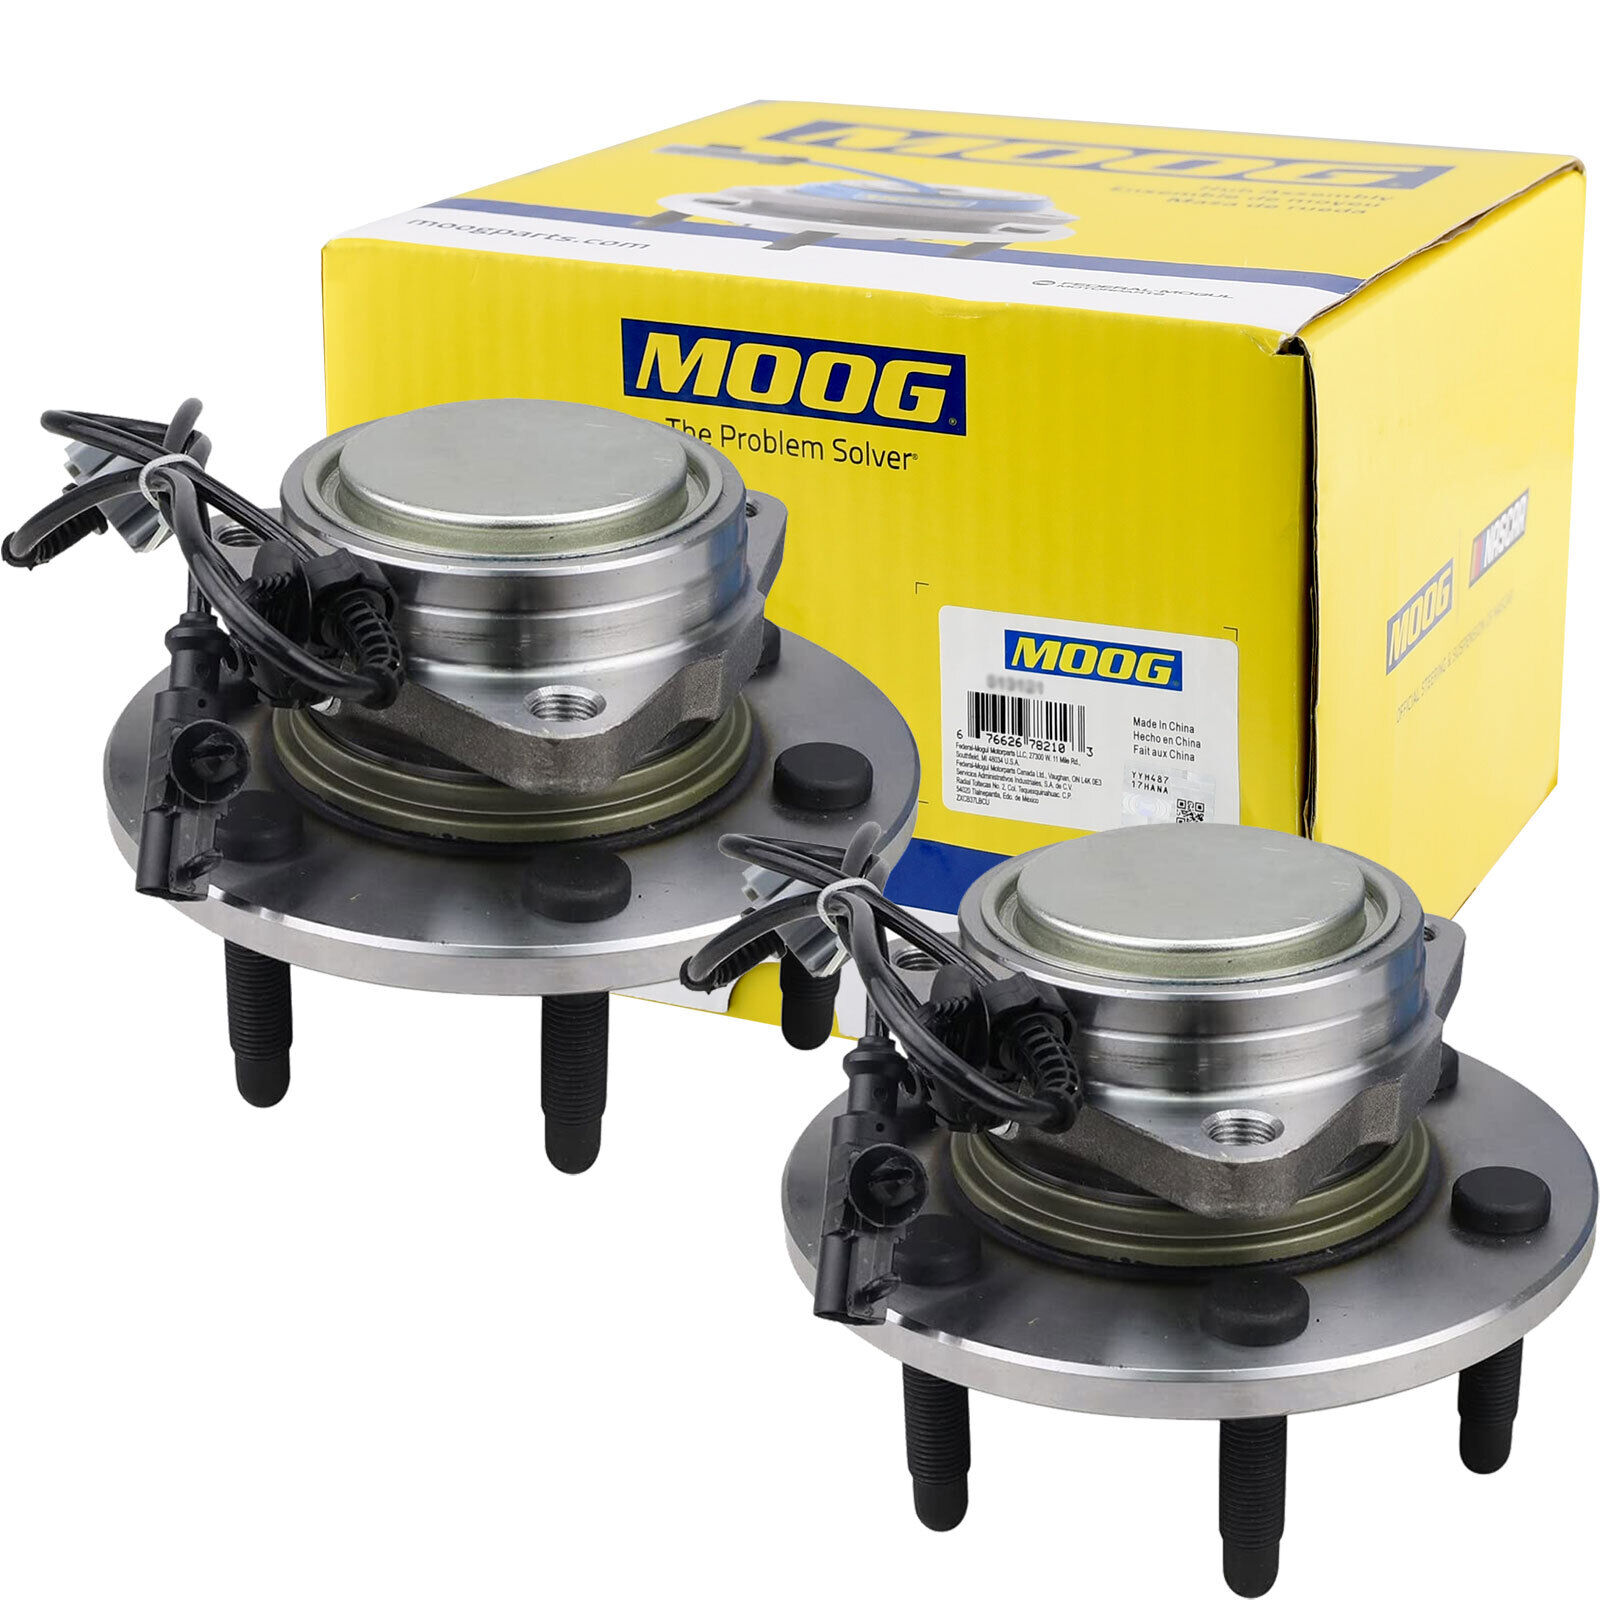 2 MOOG Front Wheel Bearing Hubs for 07-2013 Chevy Silverao Sierra 1500 2WD 6LUG